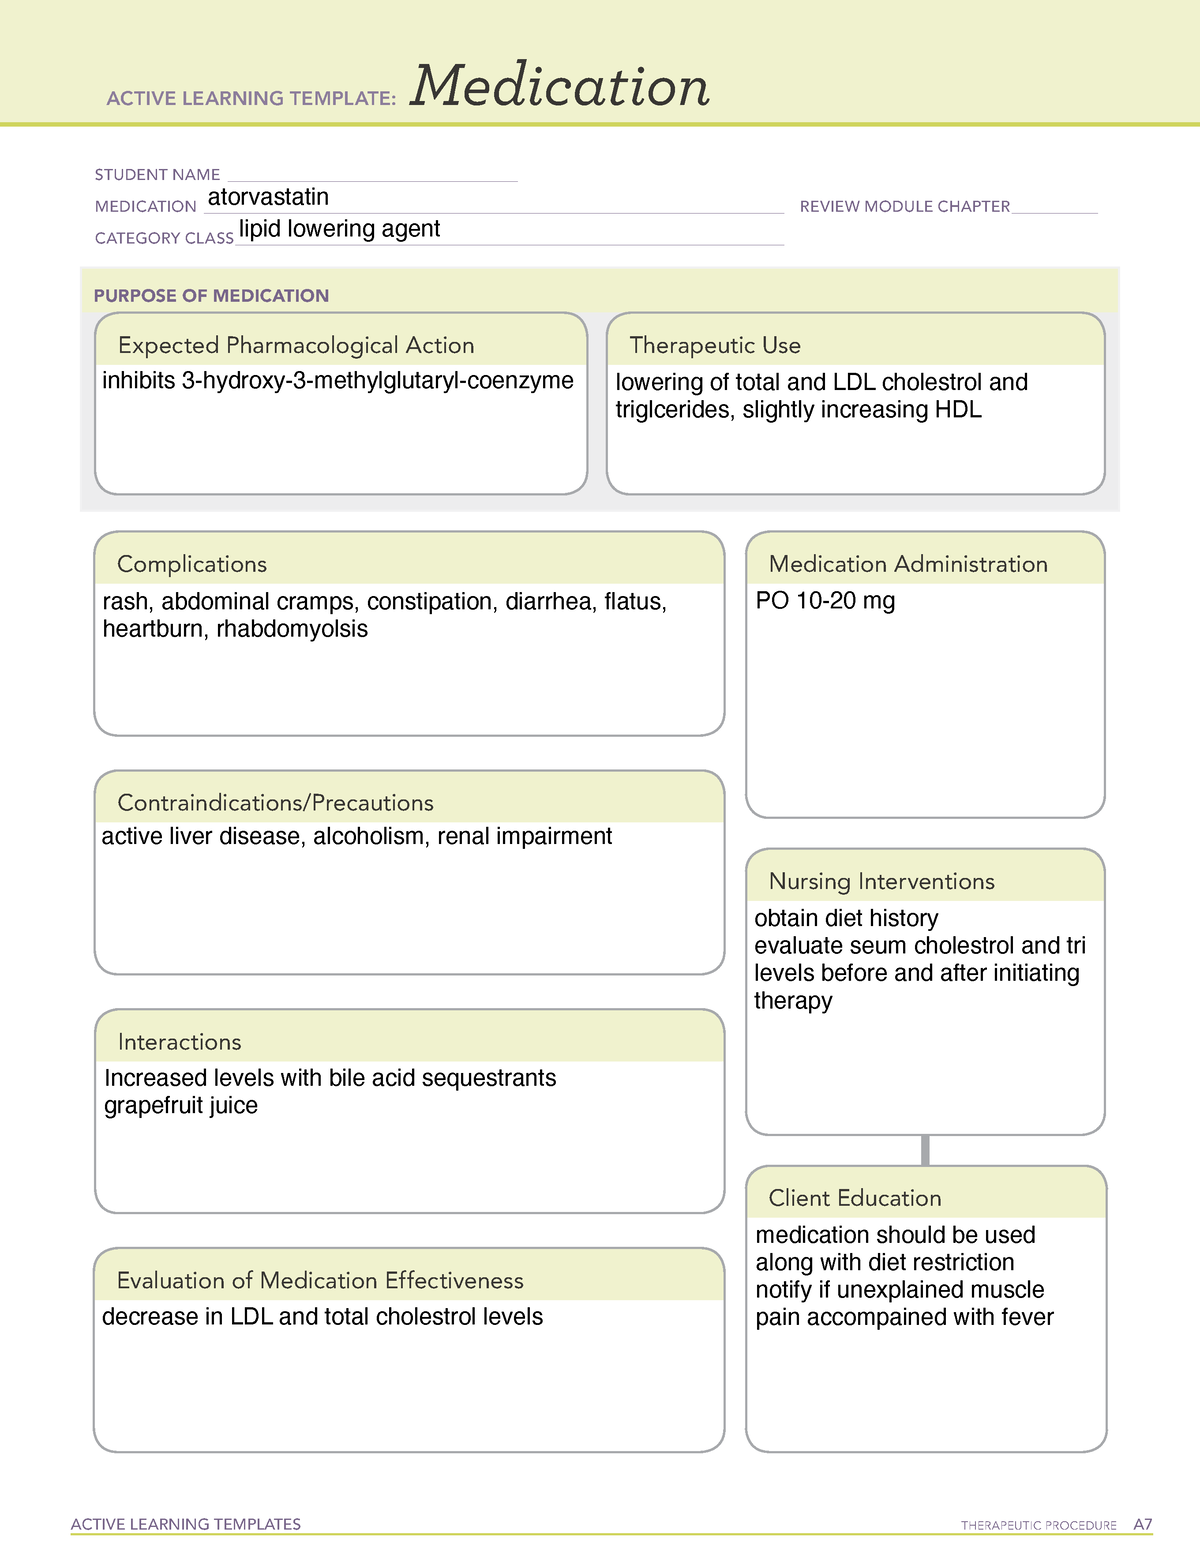 Atorvastatin medication template ACTIVE LEARNING TEMPLATES